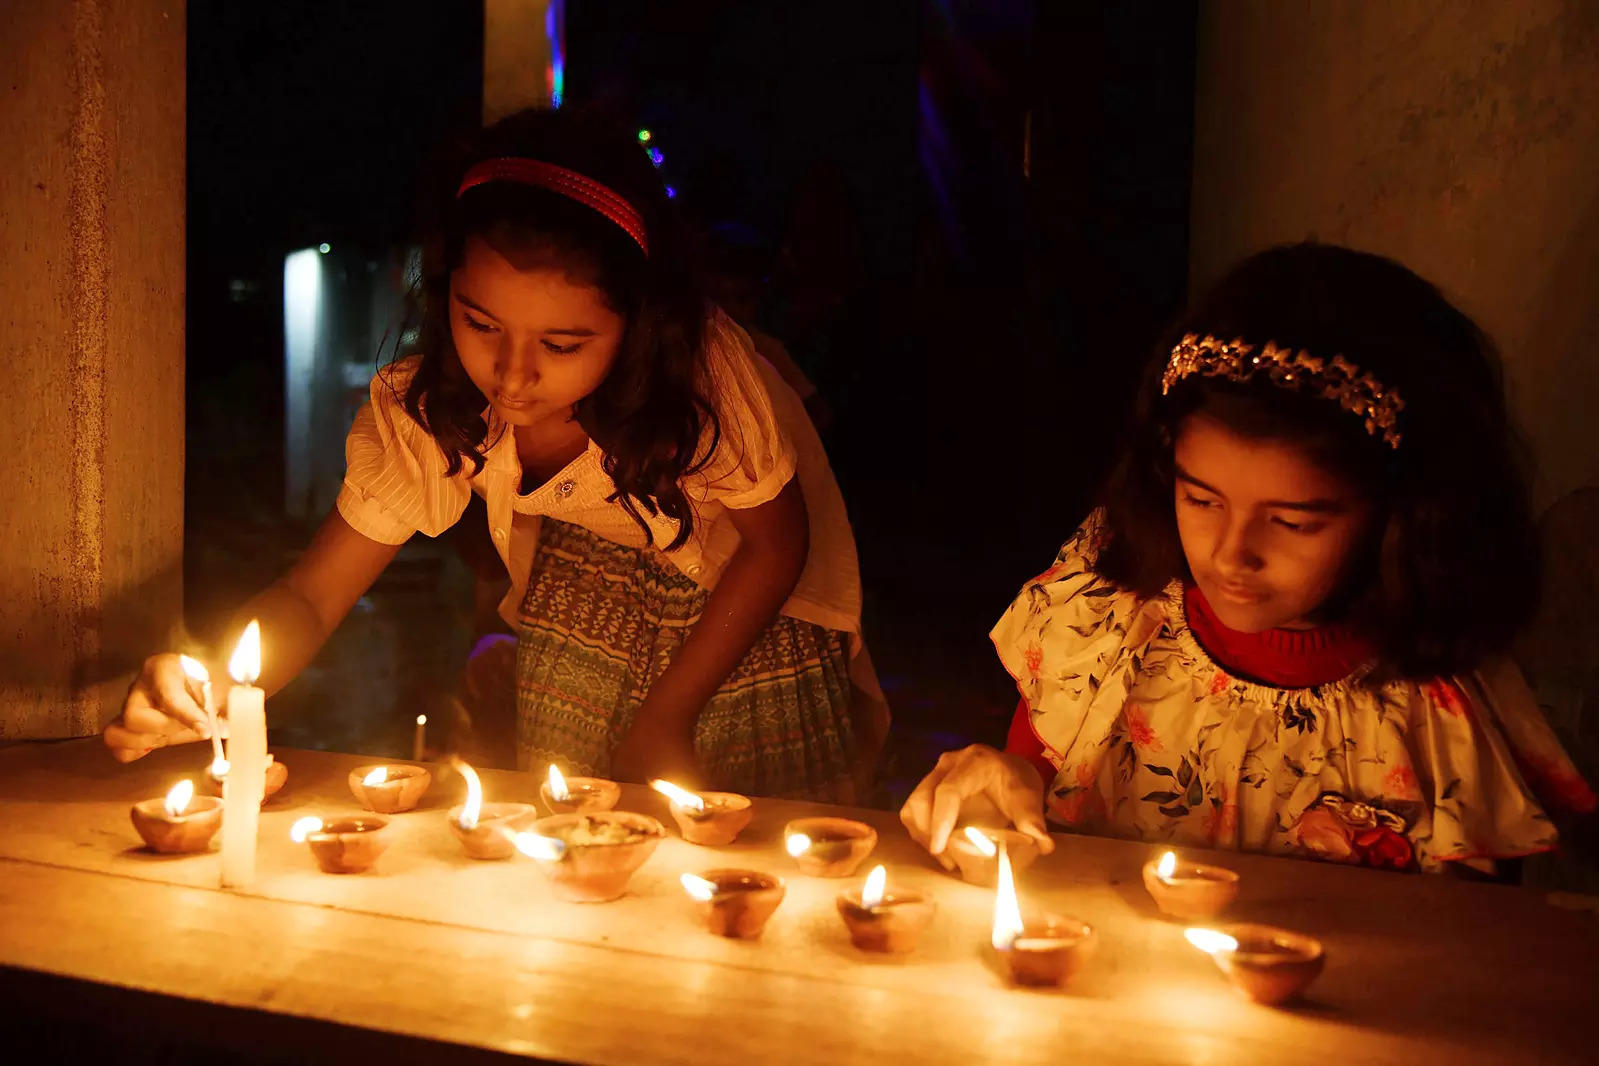 40 images from Diwali celebrations across India